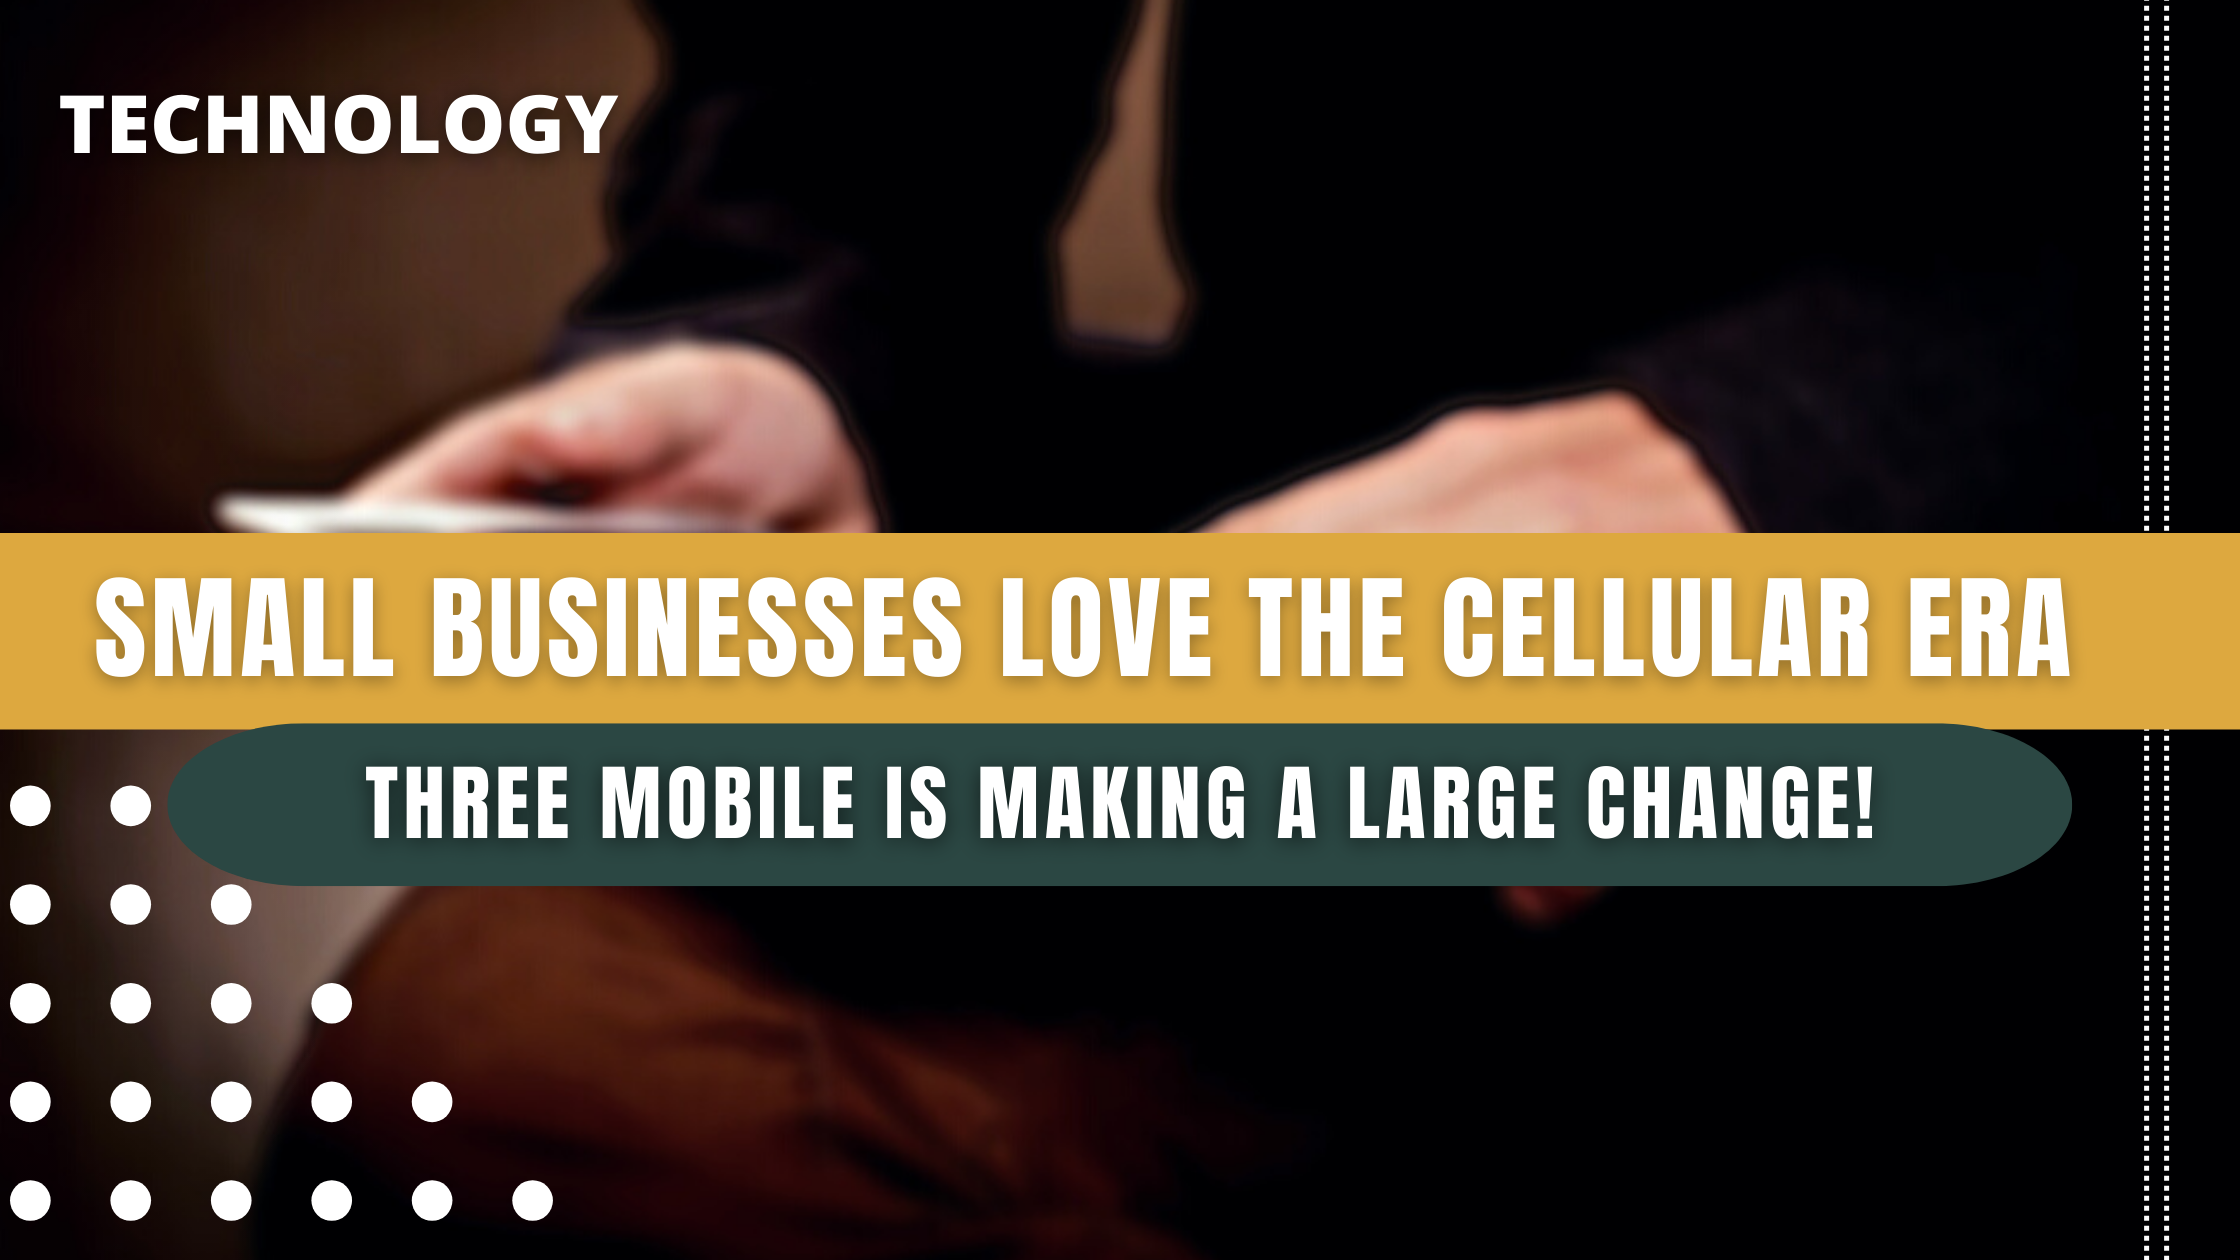 #Small #businesses #Love the #cellular (Mobile phones) era and ﻿Three #mobile Is #making a large #change!